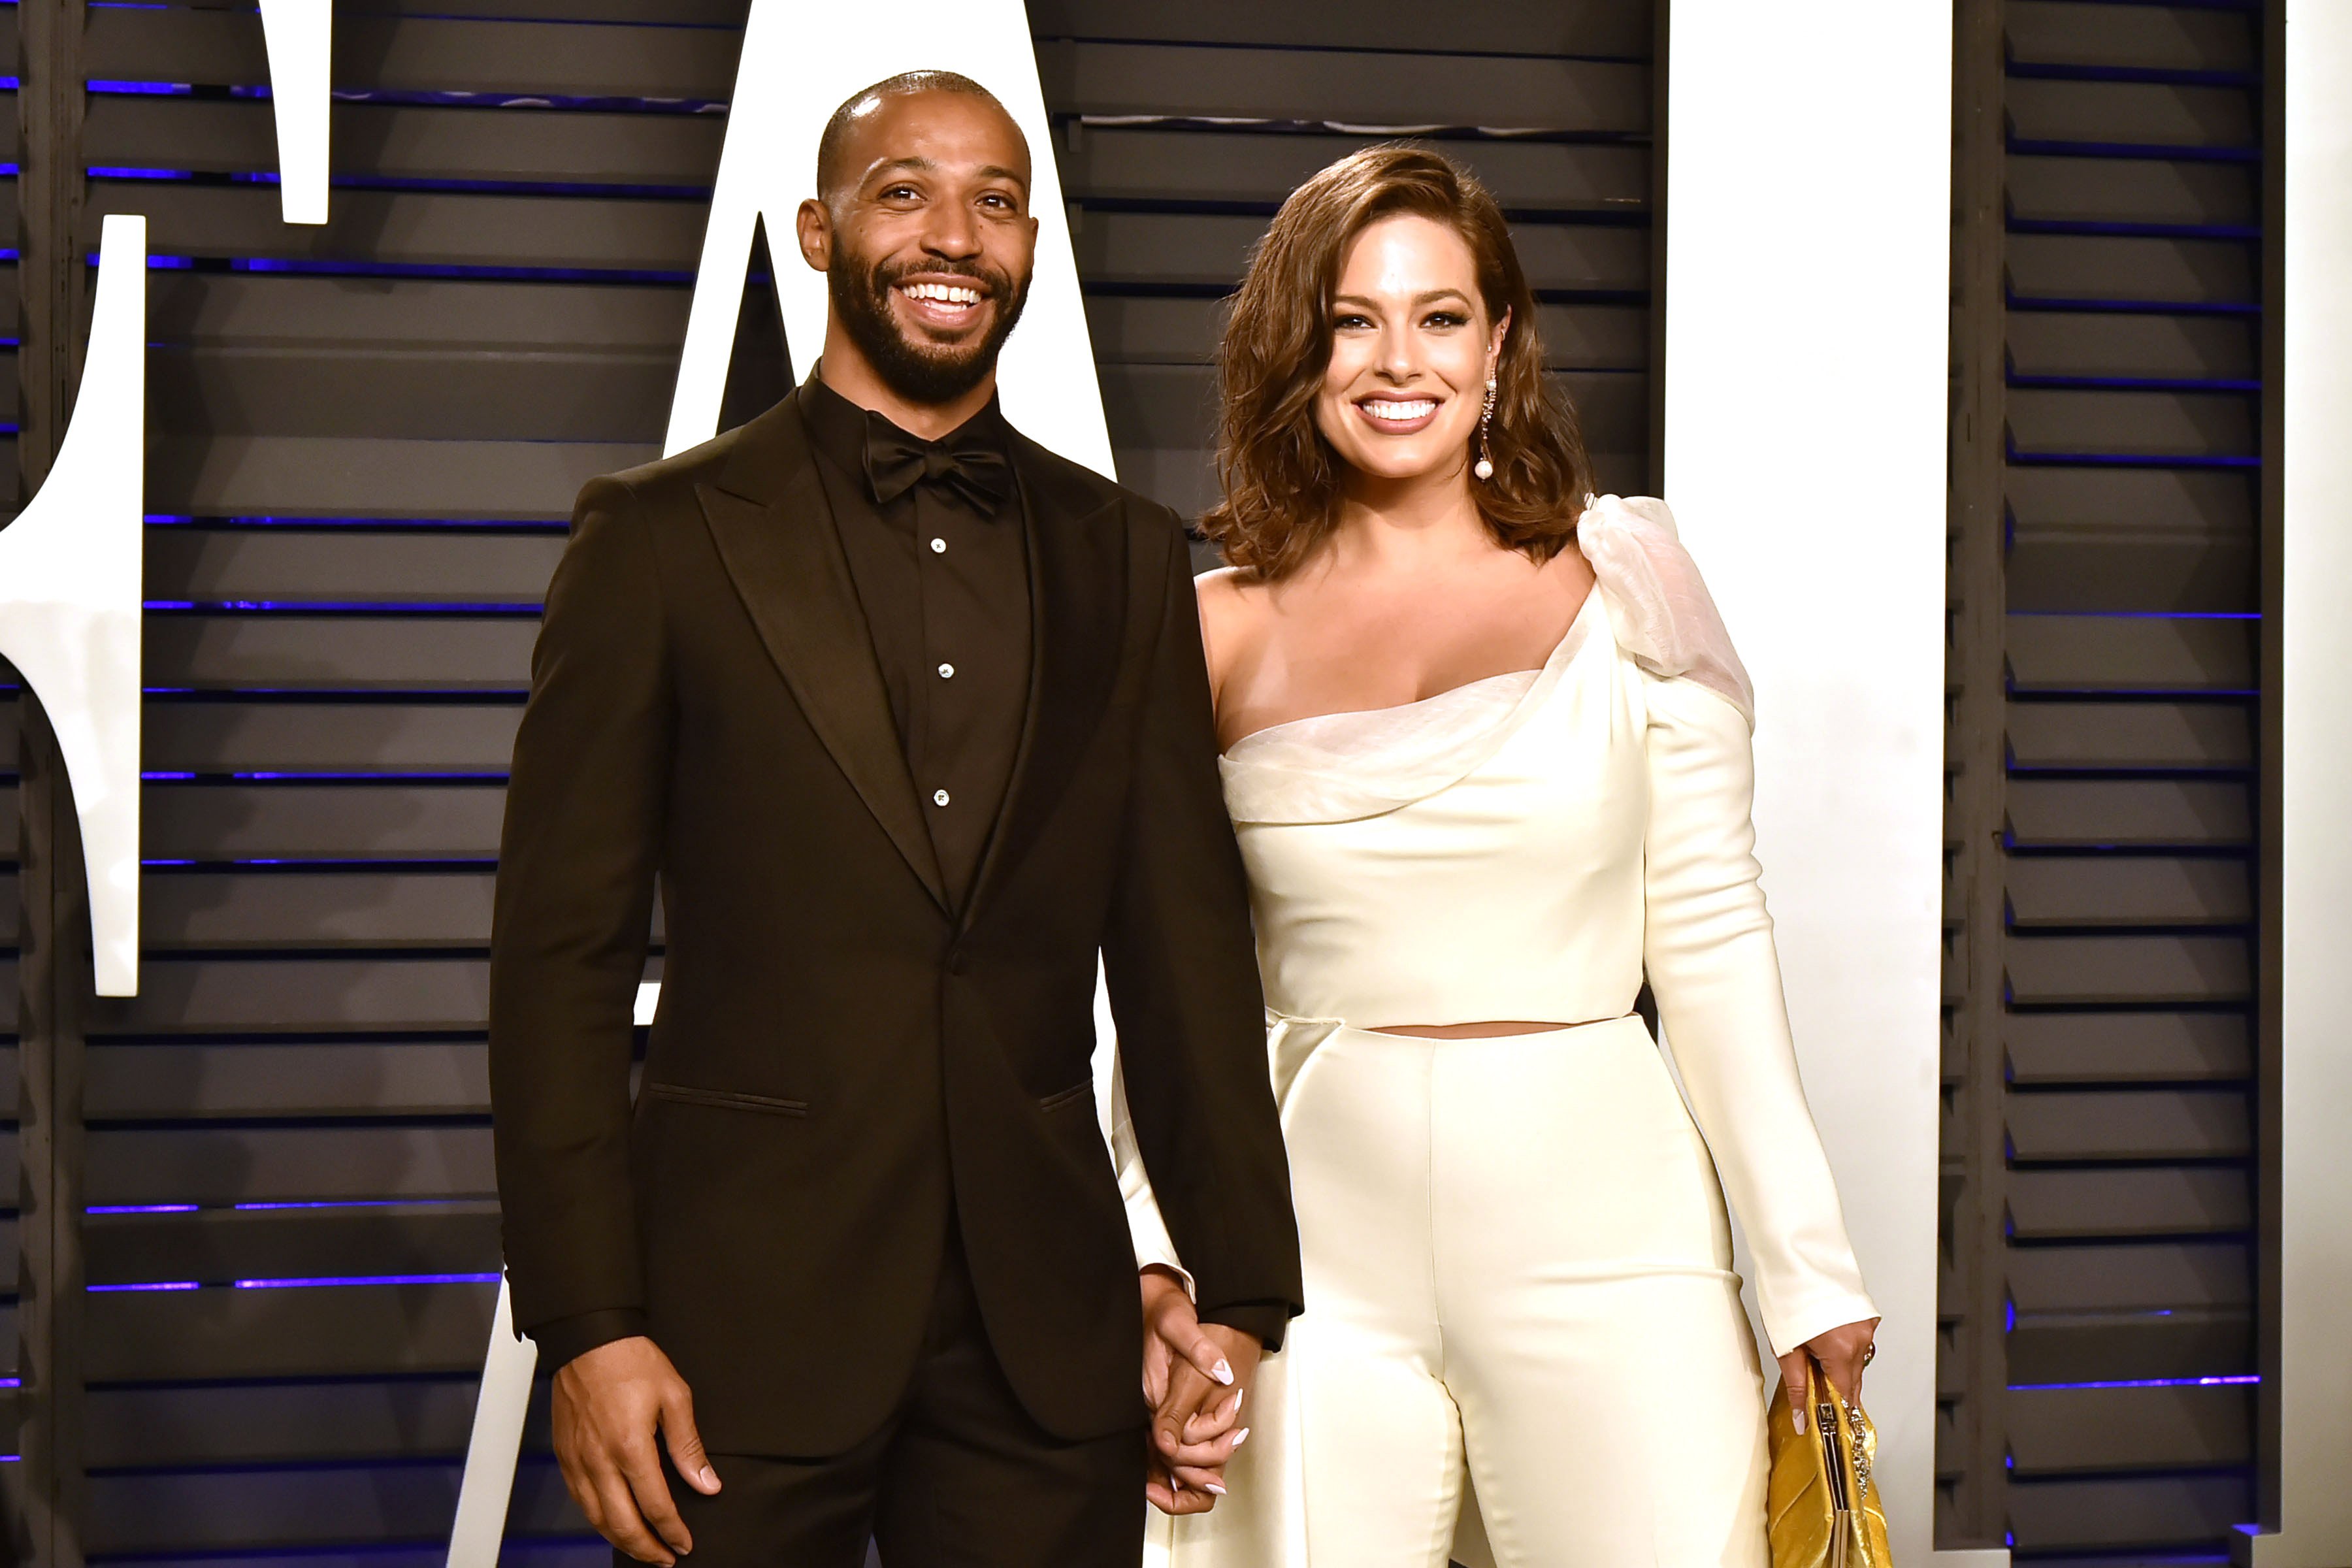 Justin Ervin in a black suit and Ashley Graham in a cream colored shirt and pants.